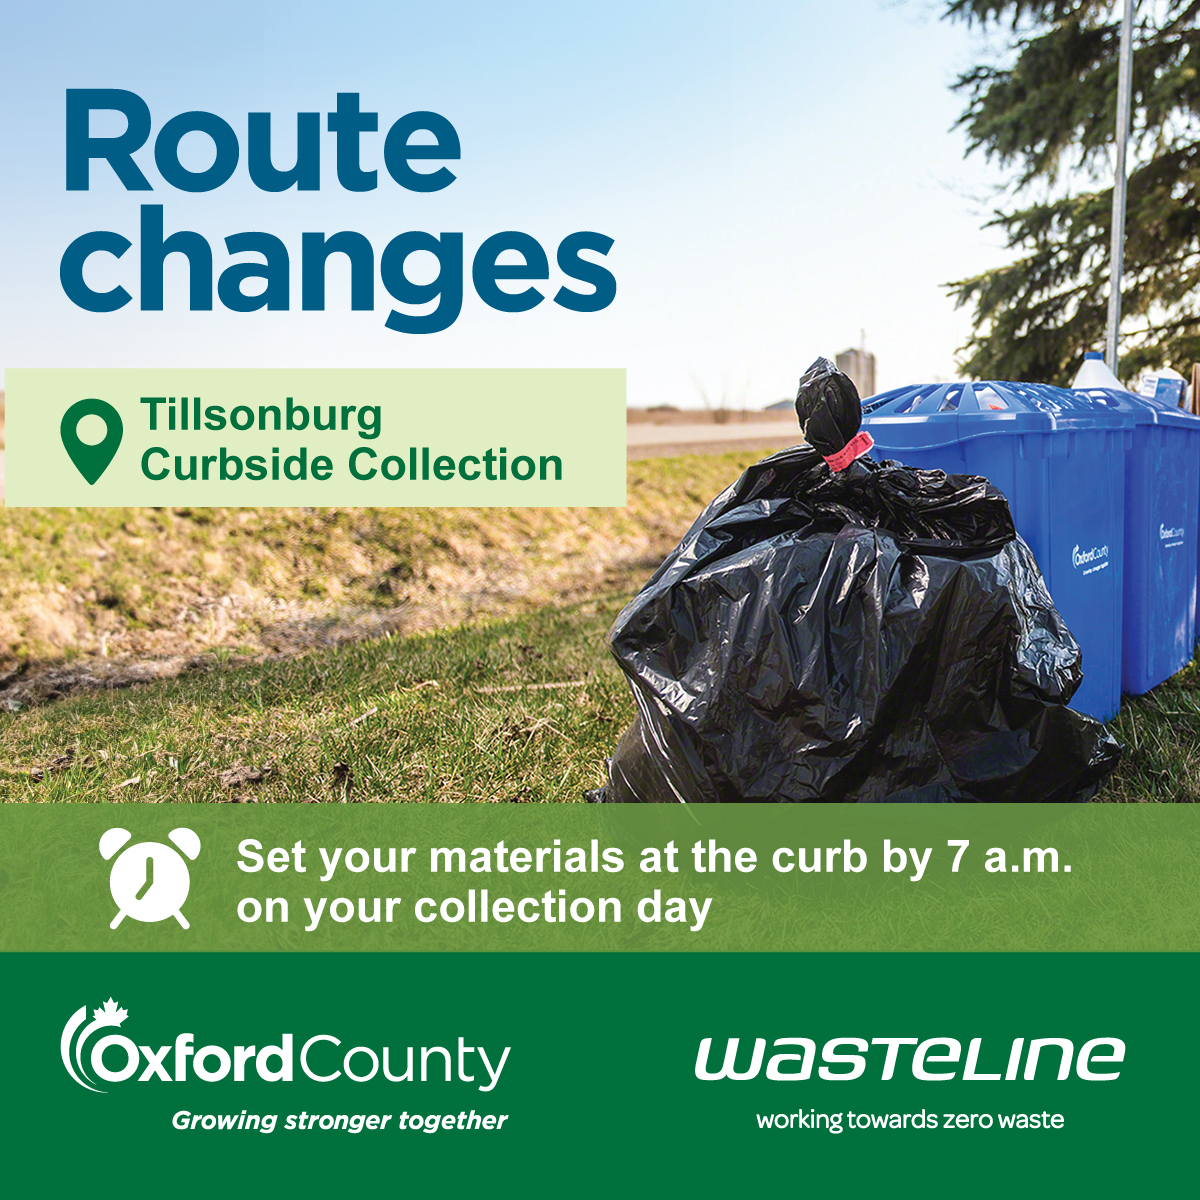 The Wednesday curbside collection routes in @TillsonburgTown are changing starting this week. Oxford County wants to use this route change to remind everyone to set materials at the curb by 7:00 a.m. on their collection day to ensure pick-up. wasteline.ca